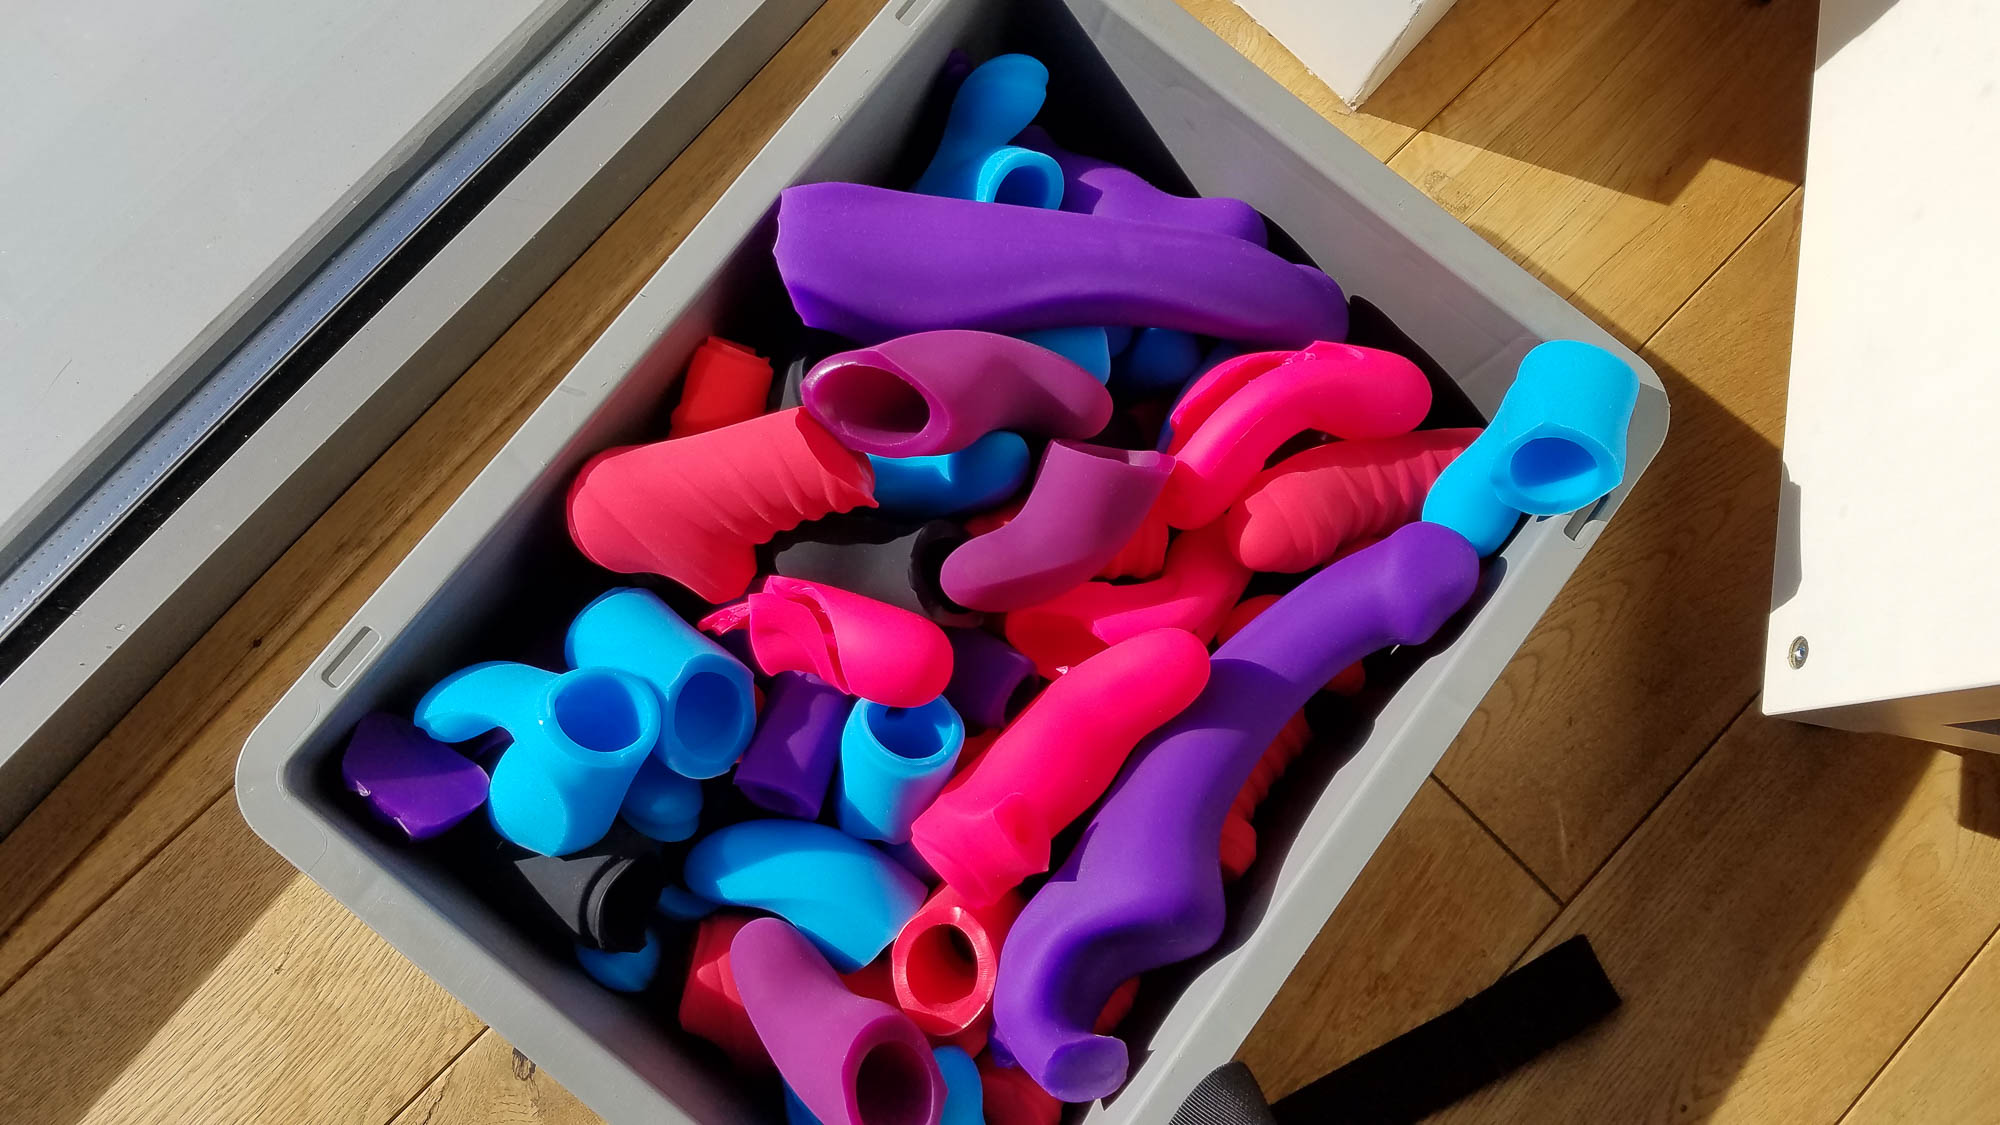 Silicone scraps from old vibrators at sex toy manufacturer Fun Factory in Bremen, Germany.